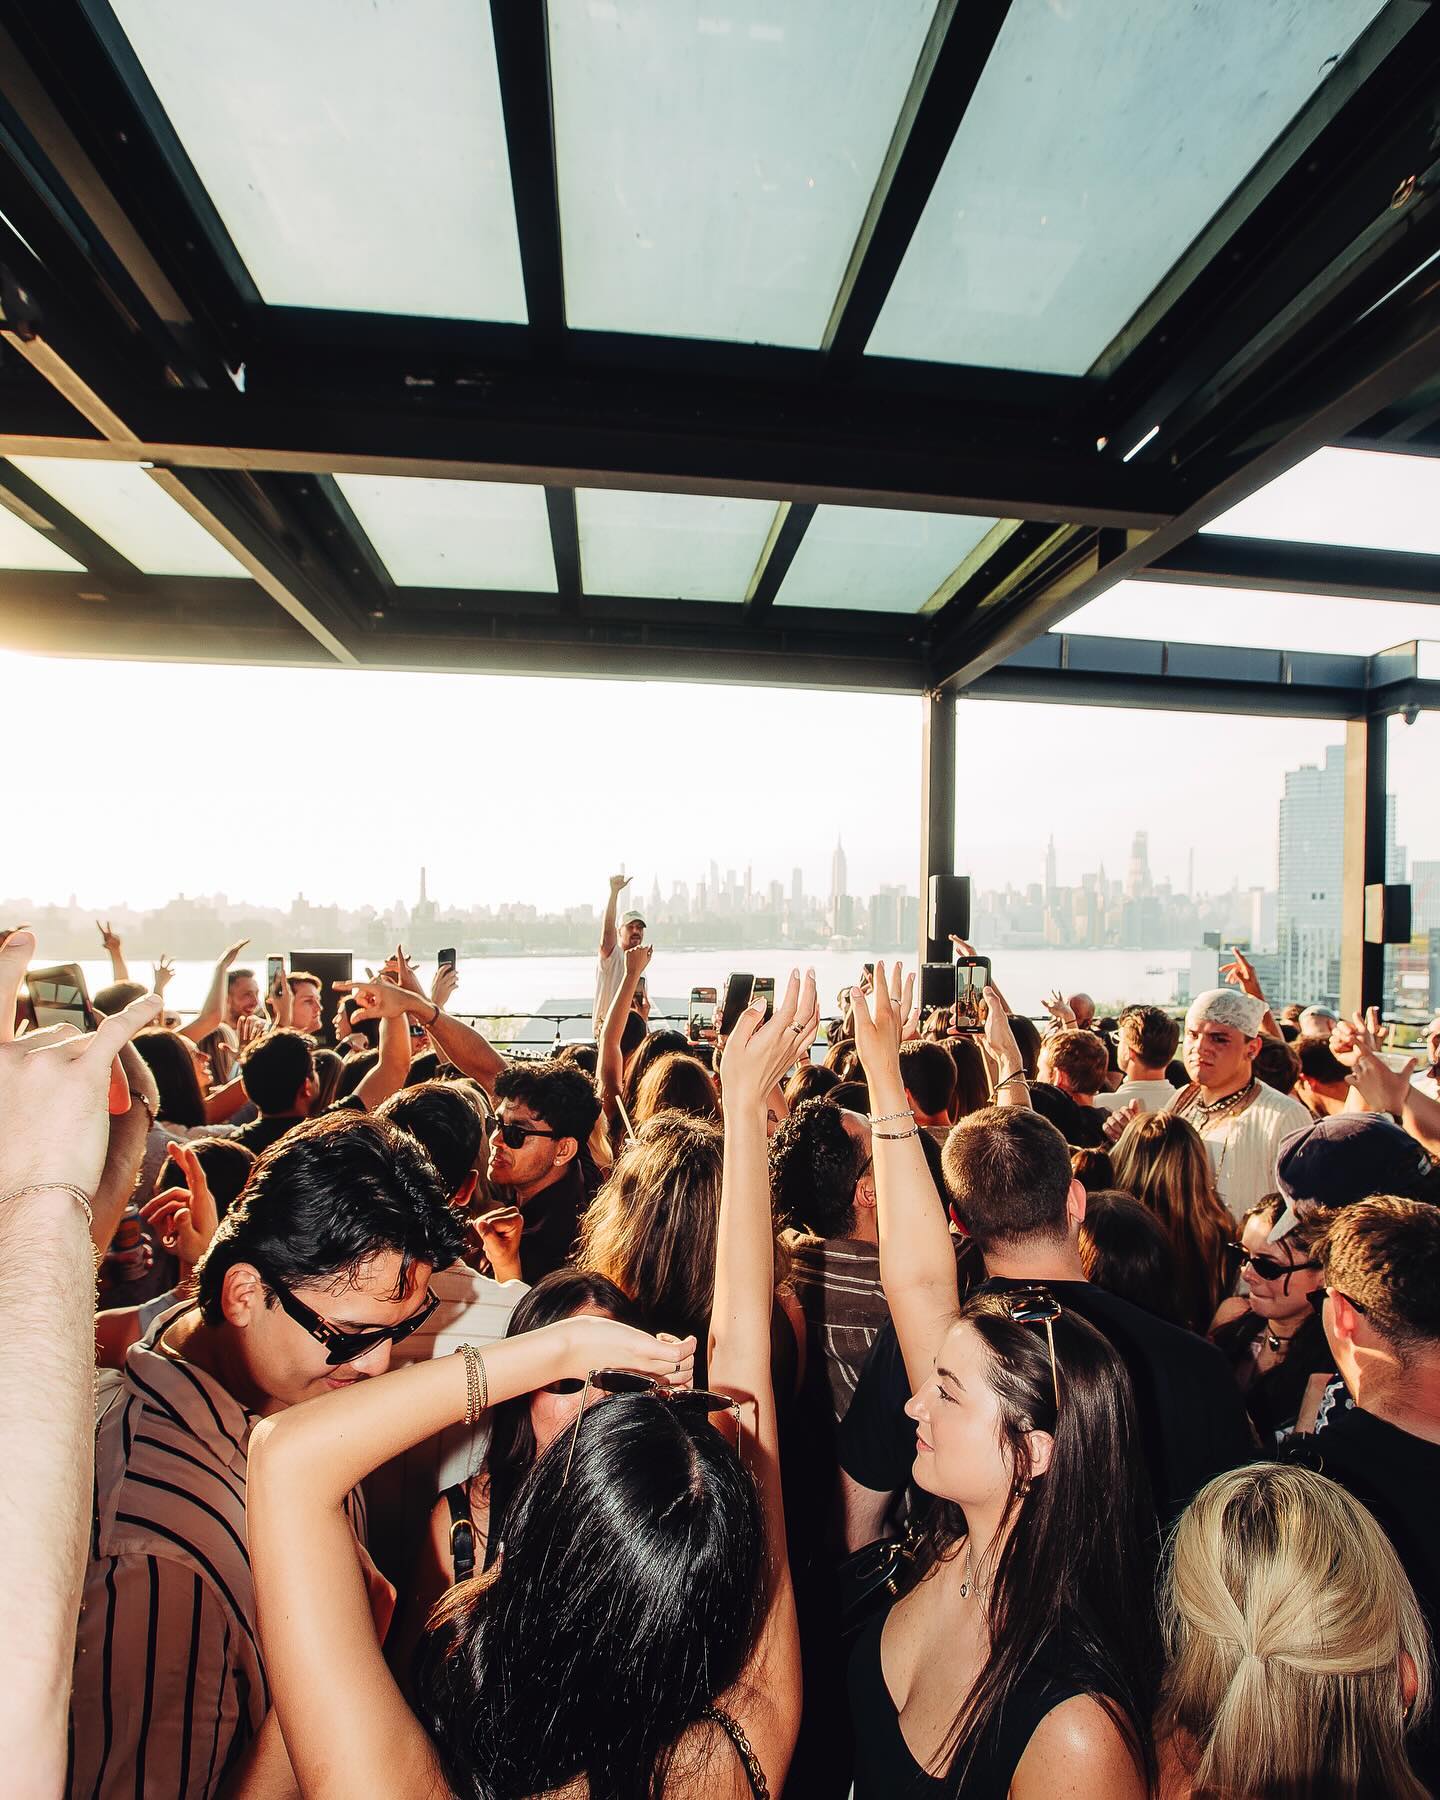 A crowded group of people are dancing and raising their hands at an outdoor rooftop party, with a city skyline visible in the background.